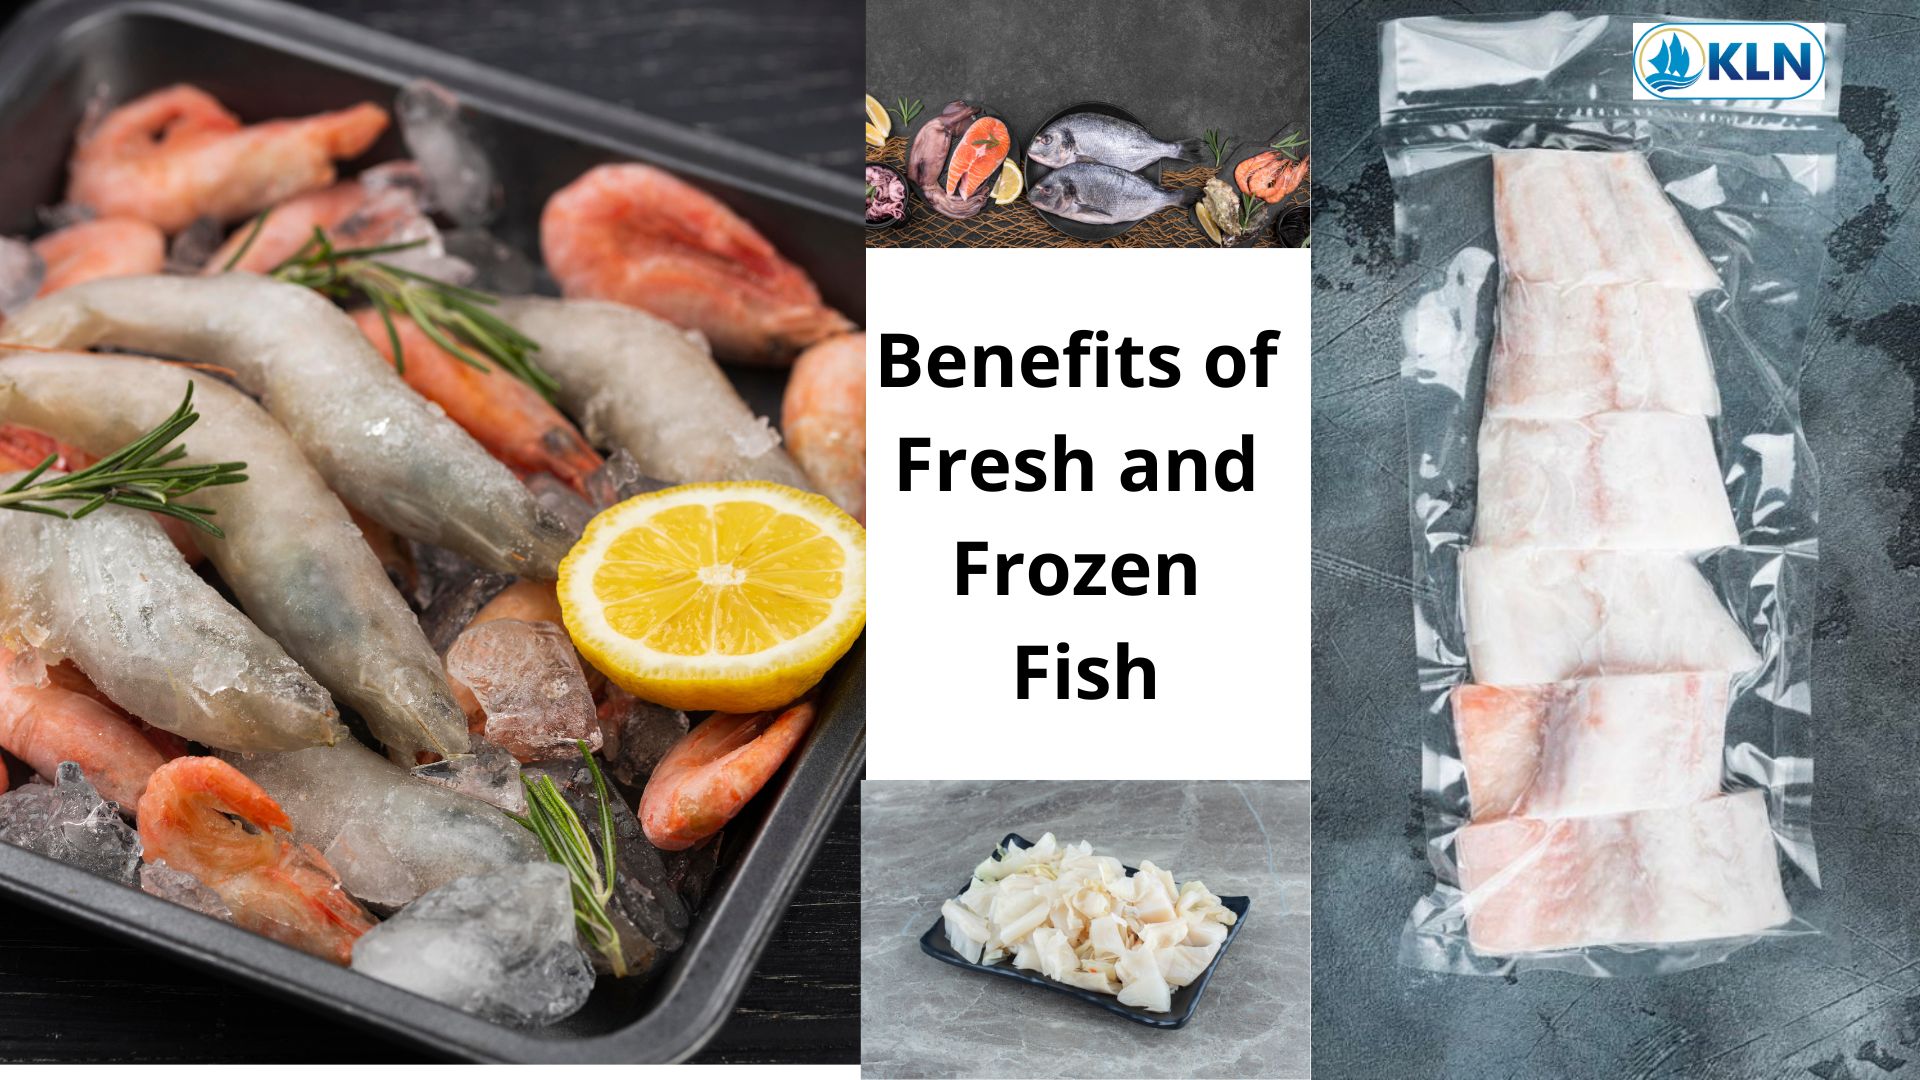 Benefits of Fresh and Frozen Fish